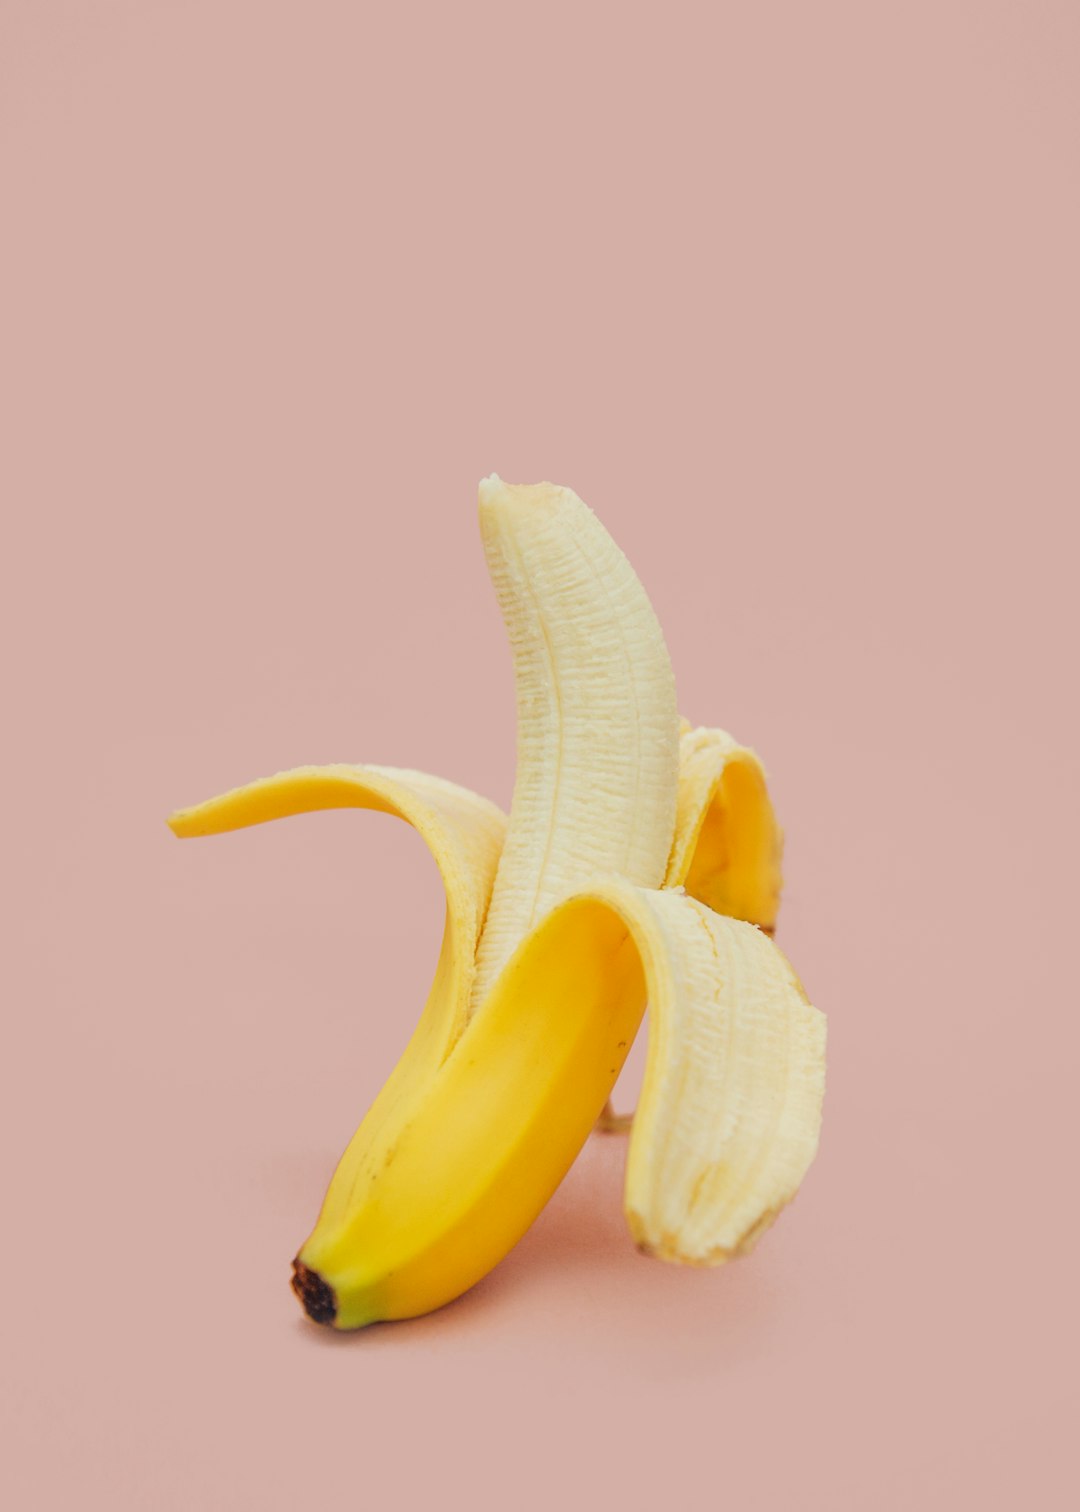 27 Banana Pictures Download Free Images  on Unsplash